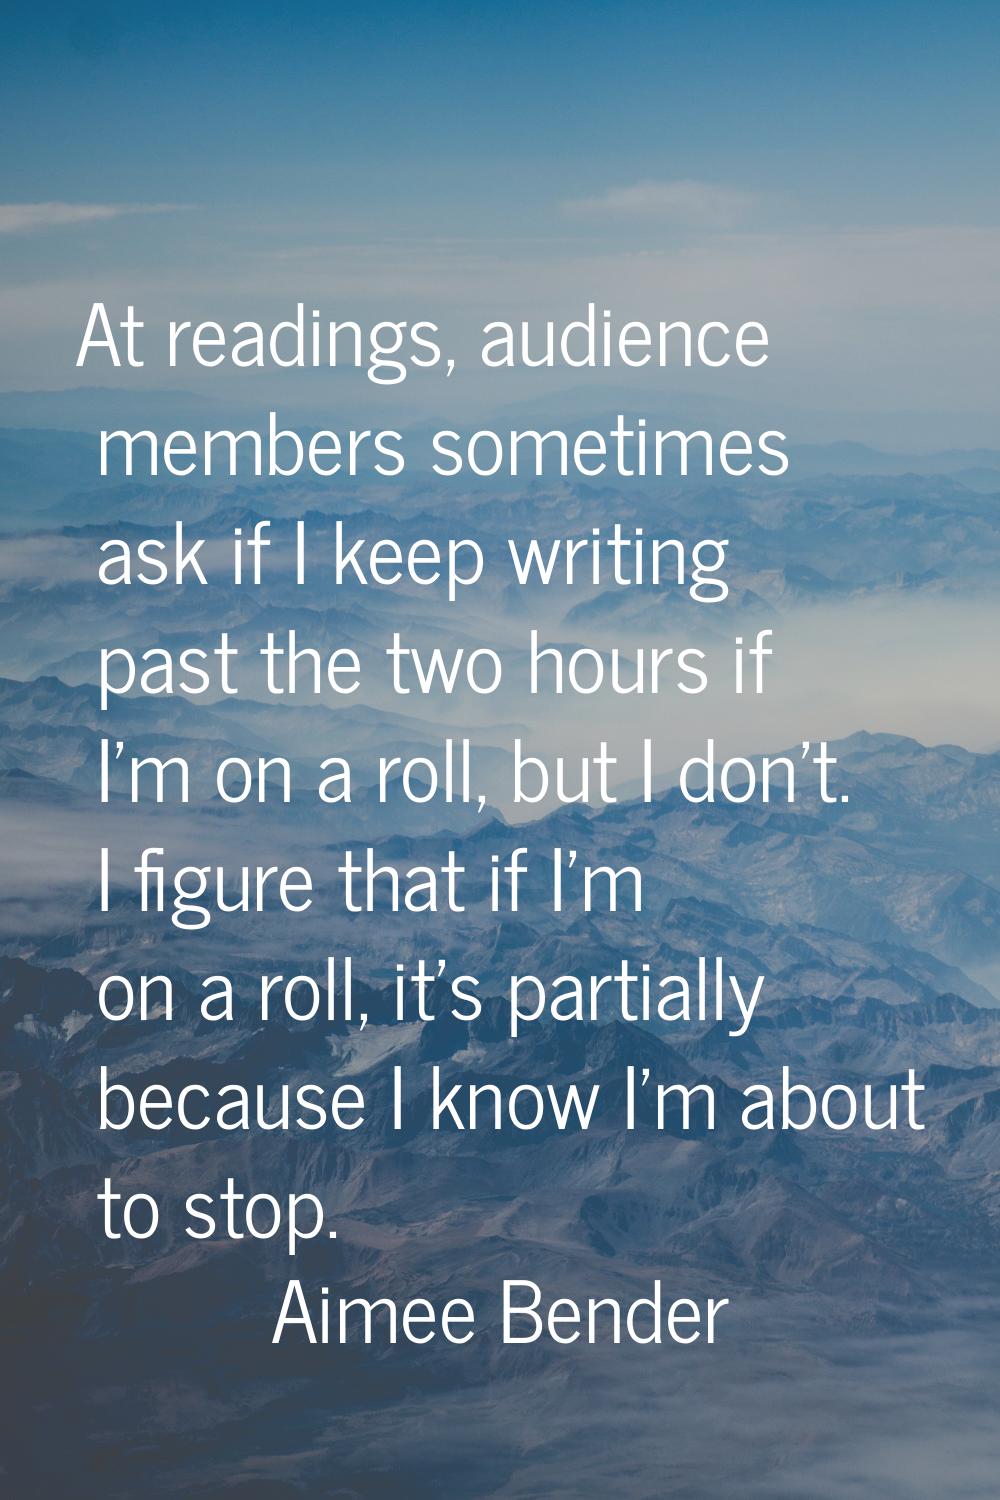 At readings, audience members sometimes ask if I keep writing past the two hours if I'm on a roll, 